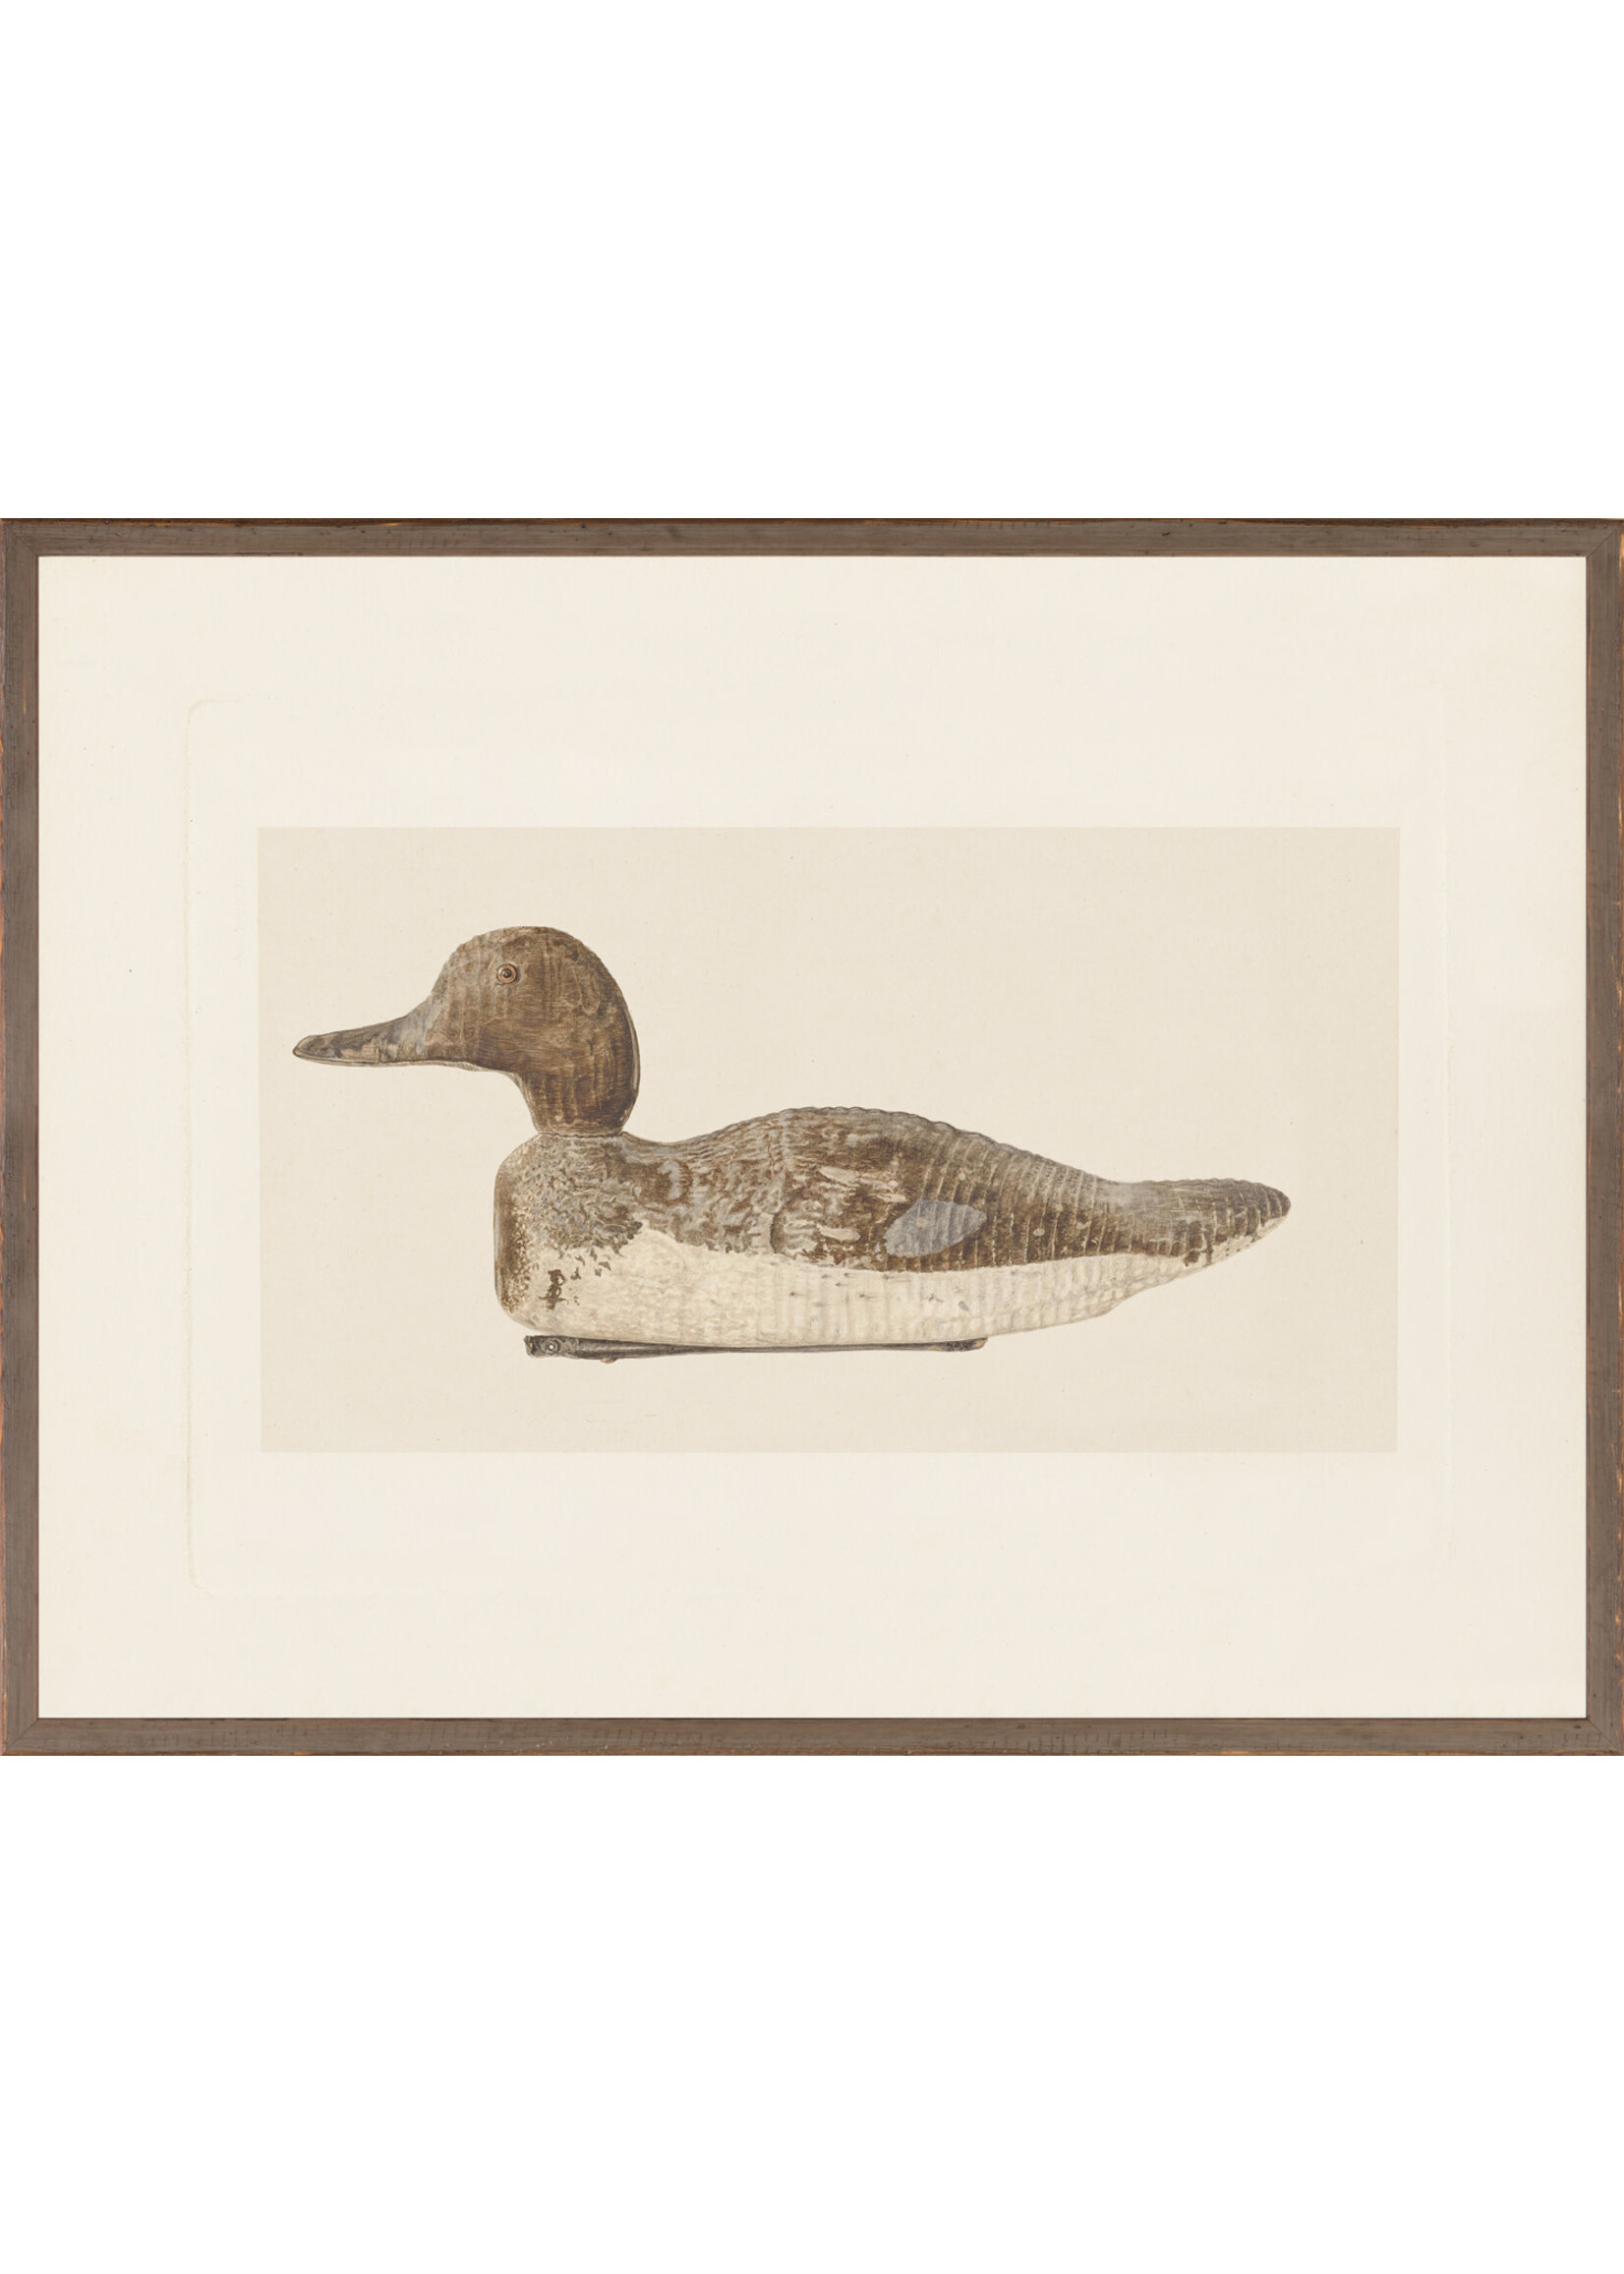 NORTHERN COLLECTION – DECOY C. 1938